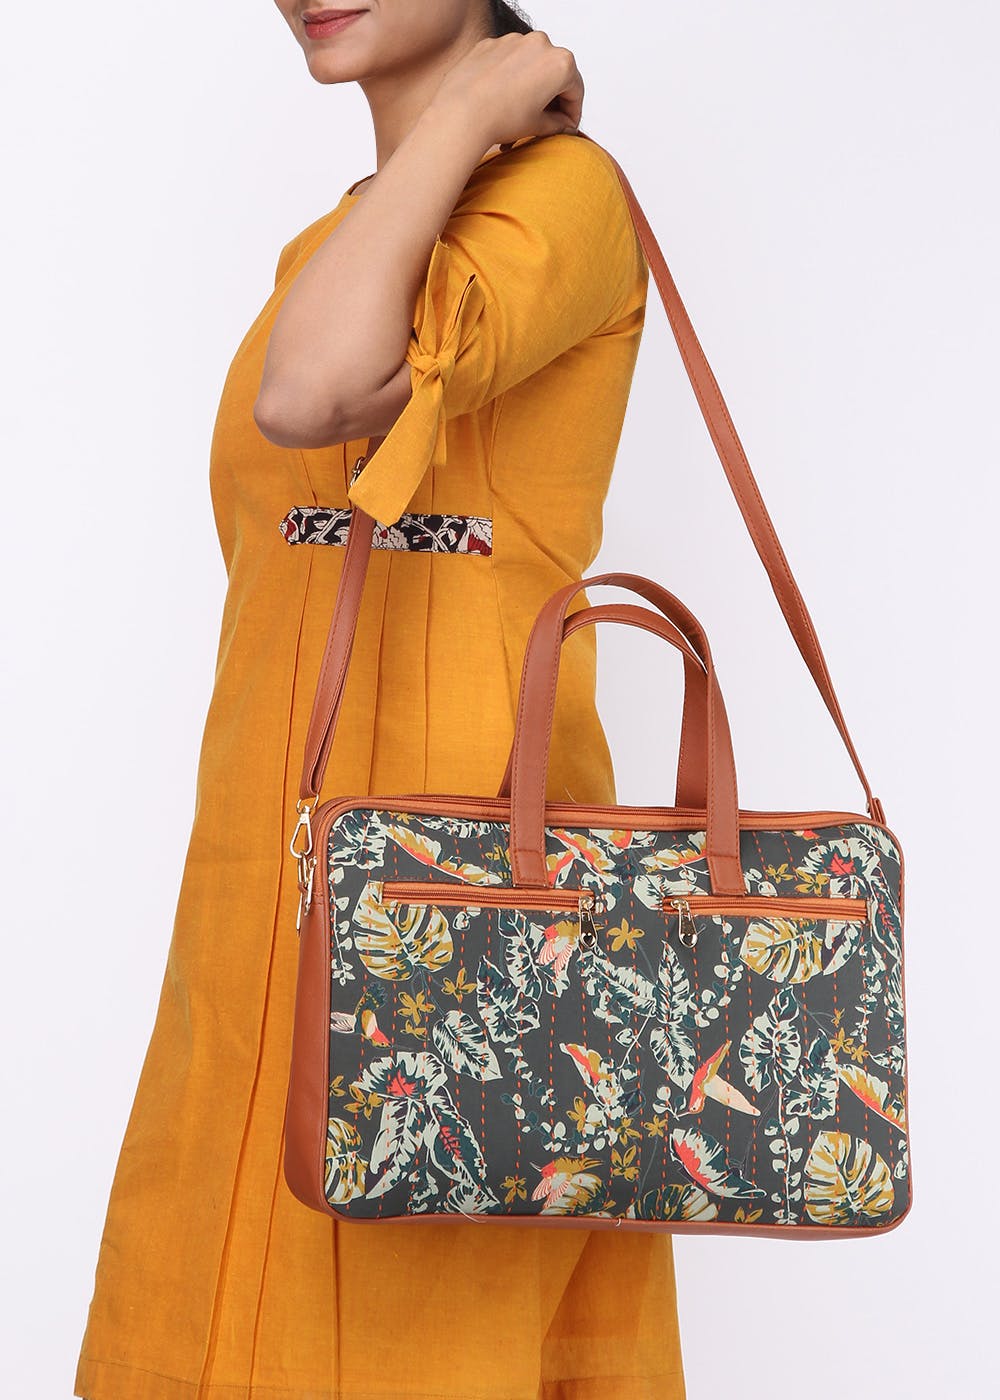 Eshopeee - Shop Online For the Best Bags, Women's Fashion | LBB